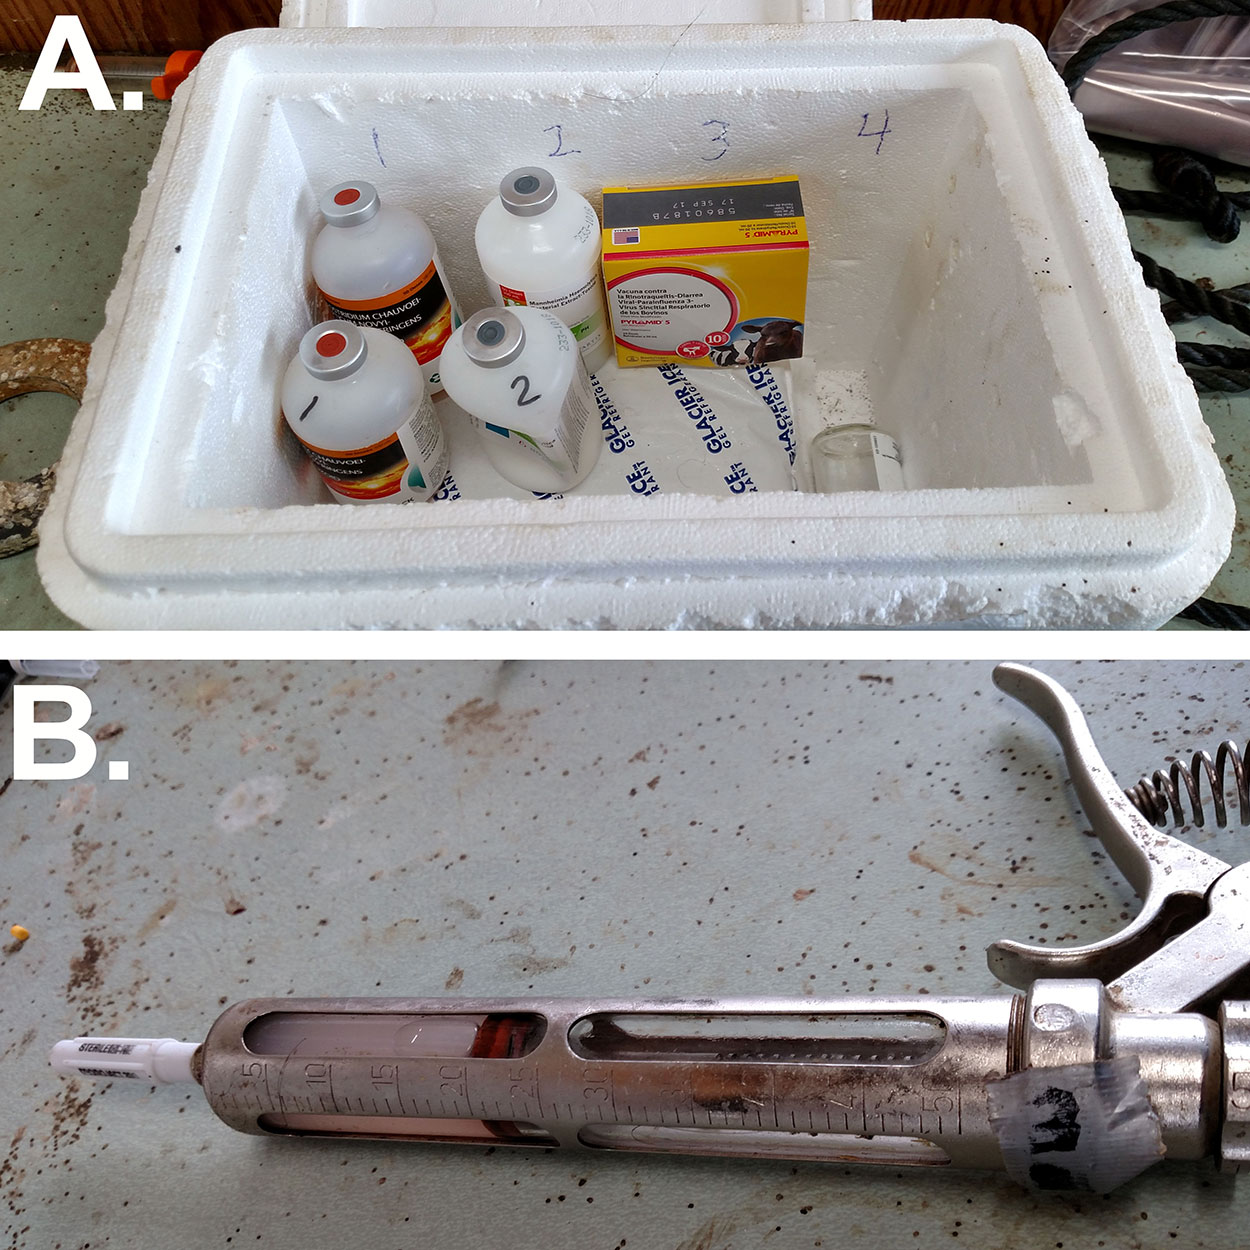 A. A well-organized cooler with numbered supplies. B. A syringe labeled “3.”